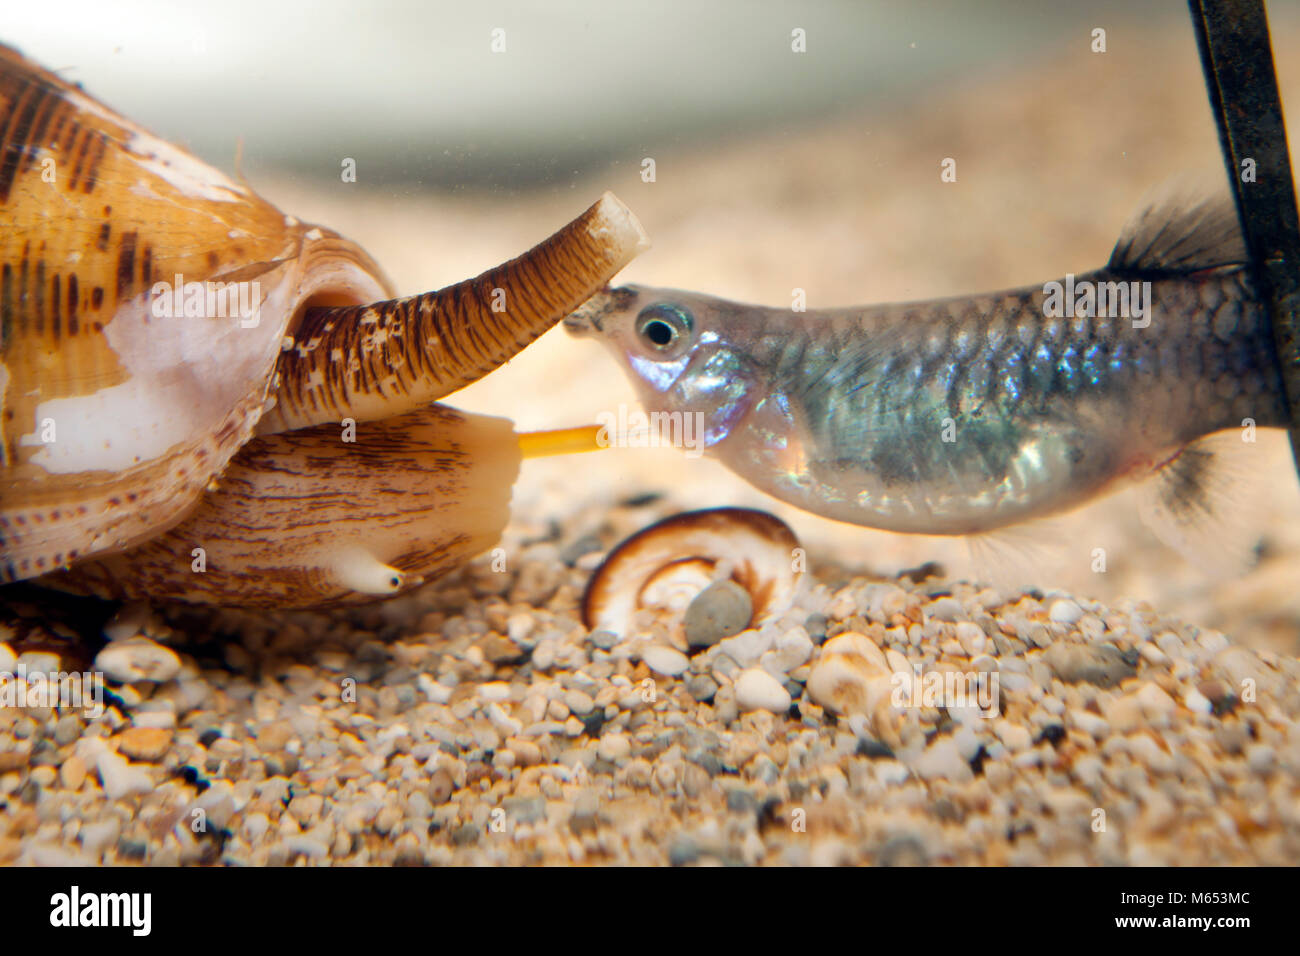 Native to reefs throughout the Indo-Pacific region, Conus striatus venom might be medically valuable because it is tailored to act on vertebrates. Stock Photo